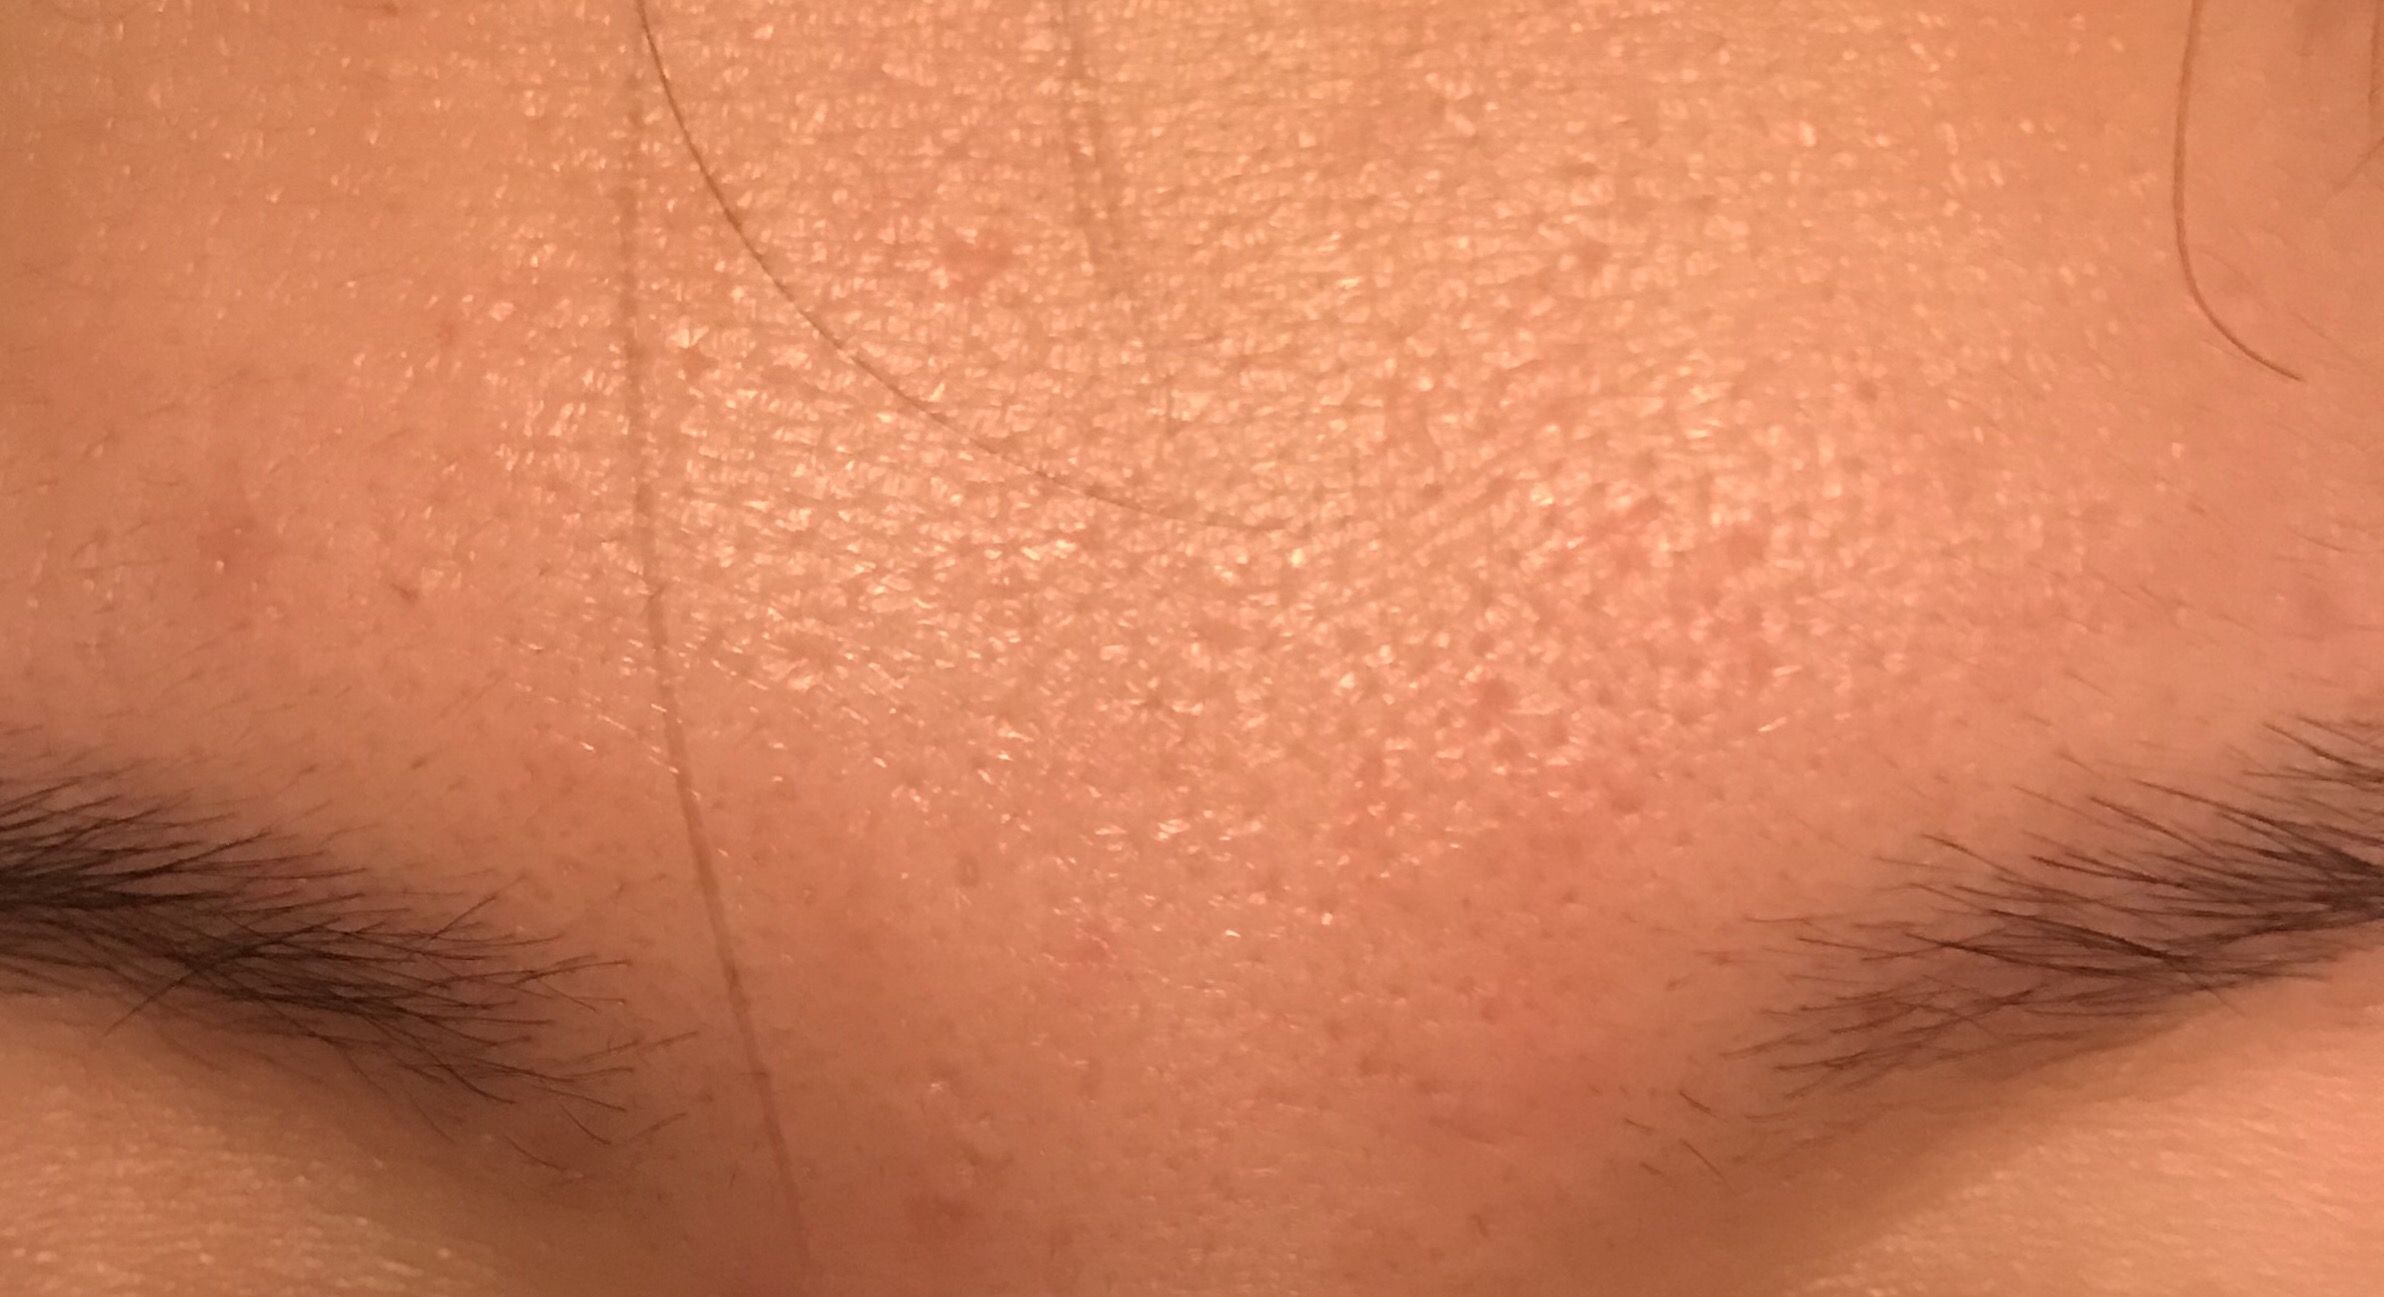 HELP! What kind of acne scars do I have? - Scar treatments - Acne.org